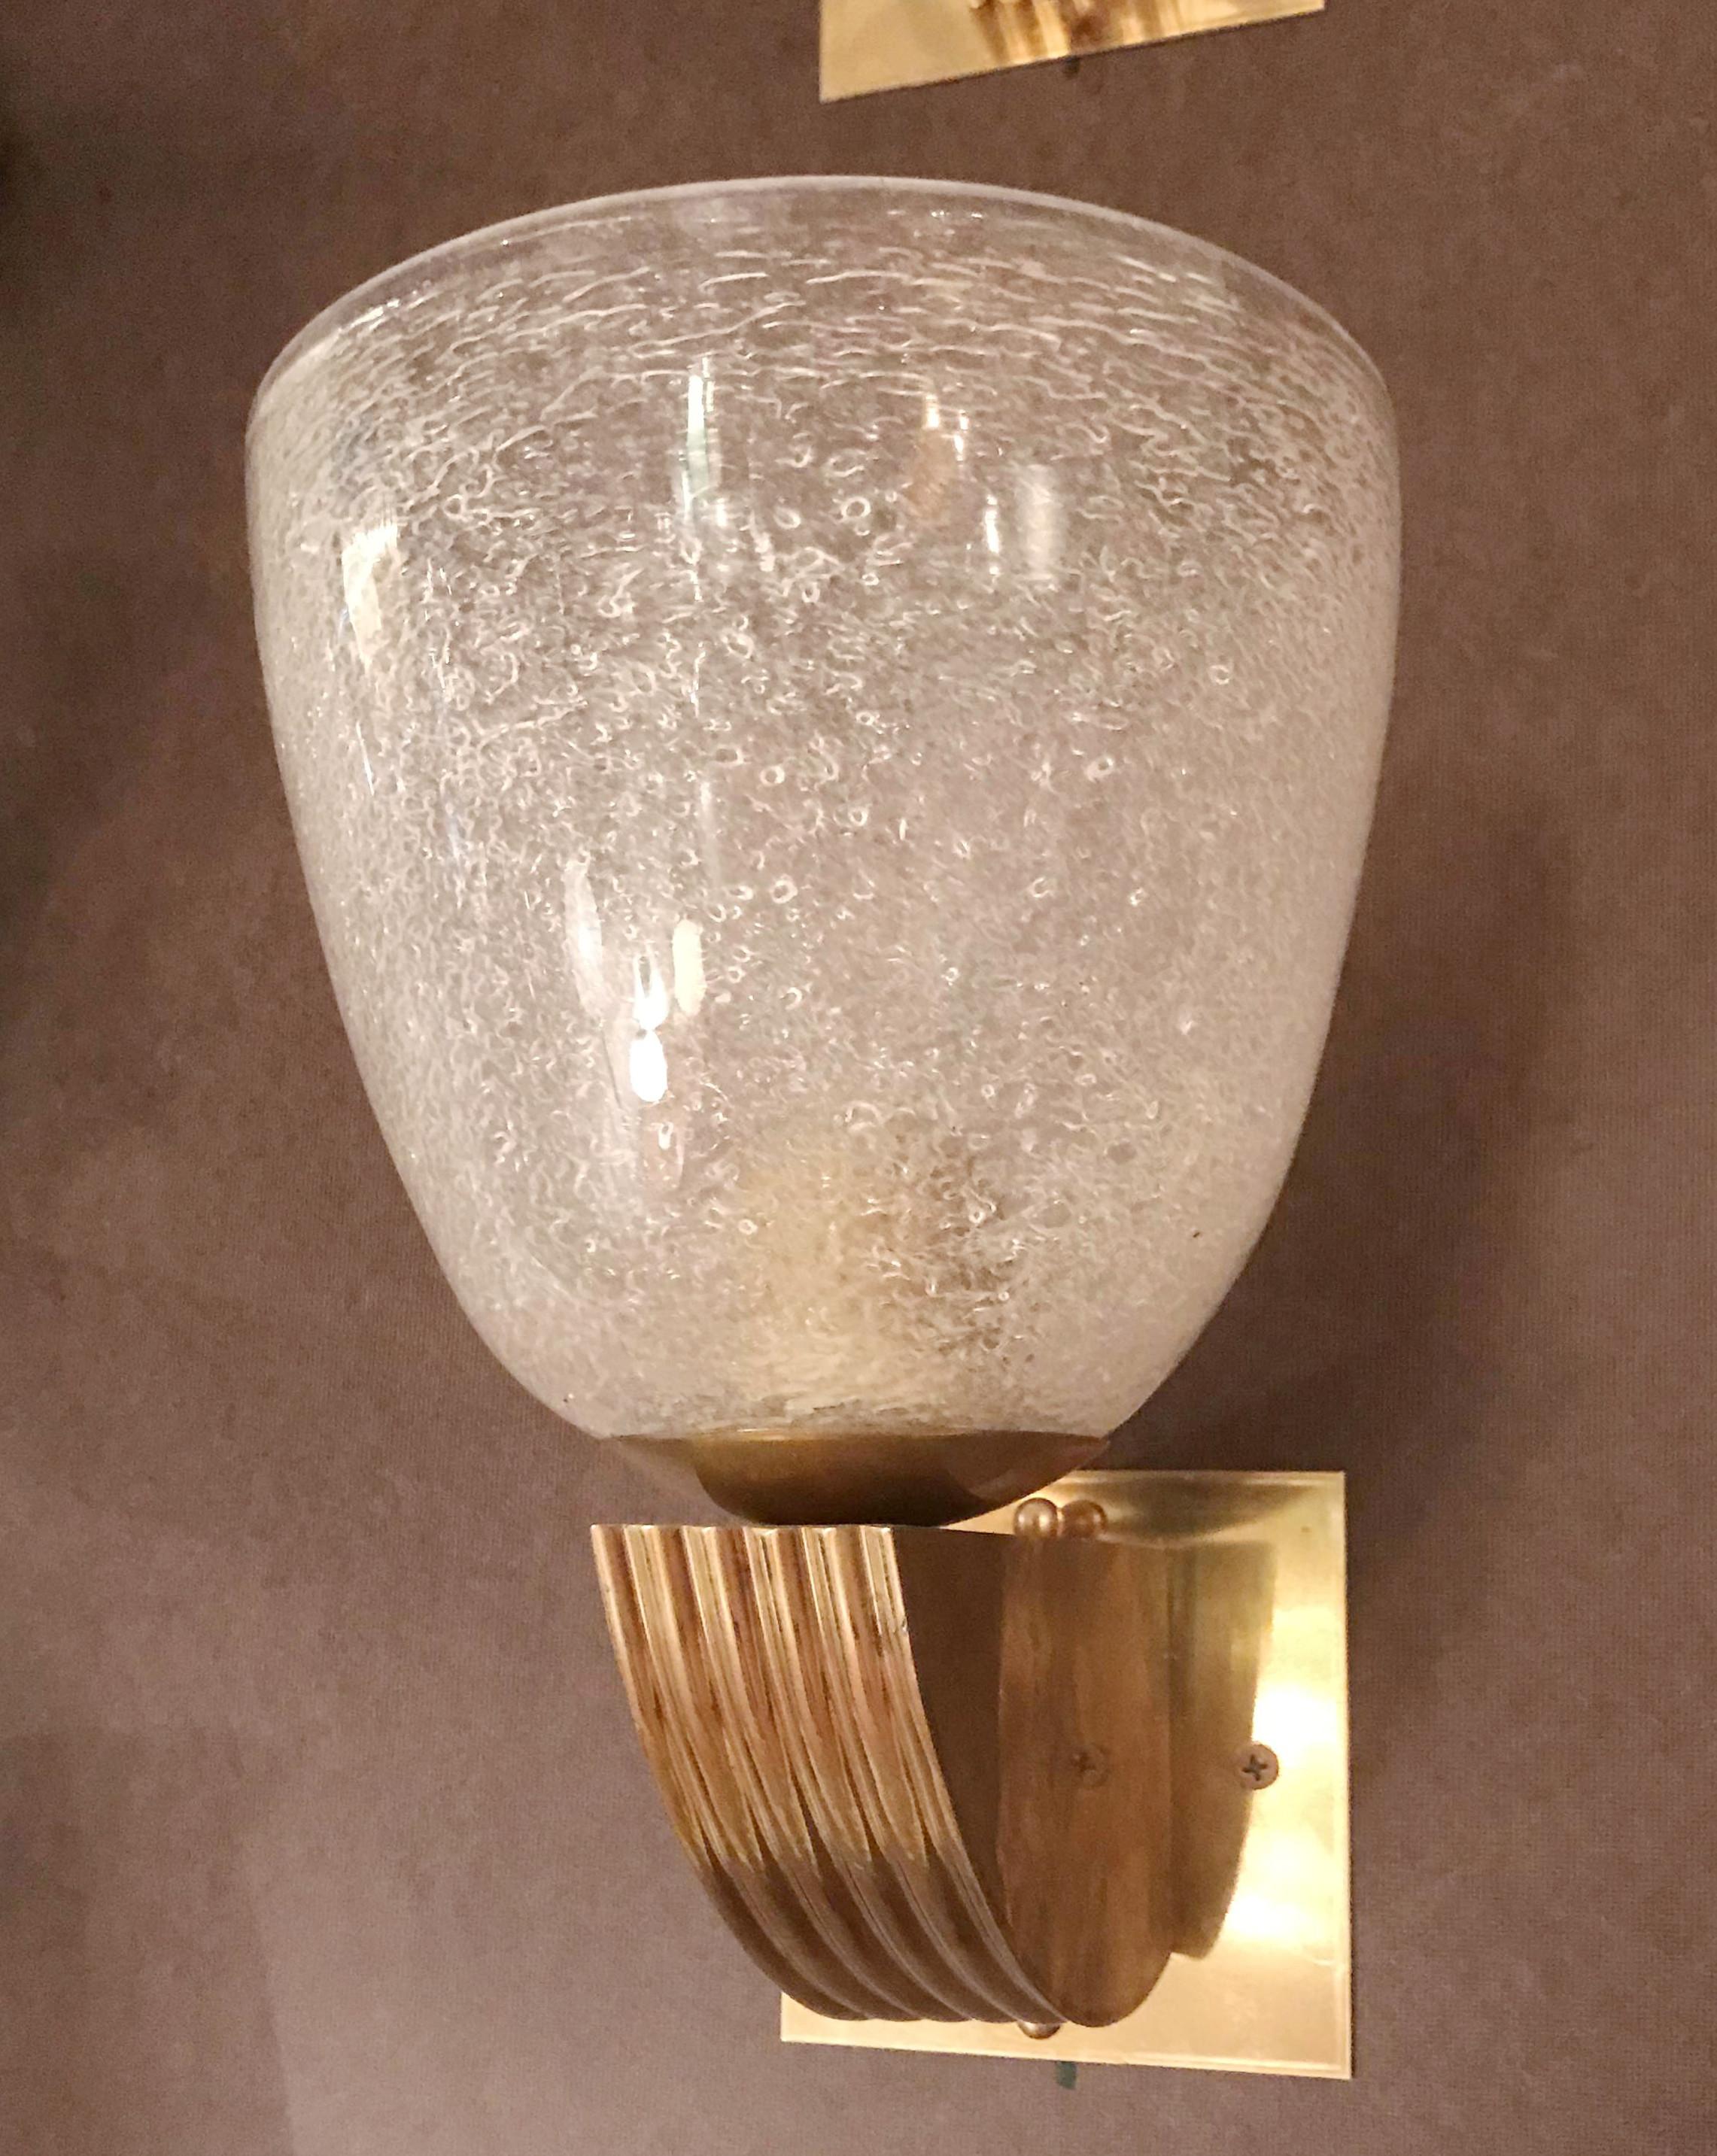 One of a kind Italian Art Deco style wall light with vintage clear textured Murano glass, circa 1960s, mounted on newly made brass frame / Designed by Fabio Bergomi for Fabio Ltd / Made in Italy
1 light / E26 or E27 type / max 60W
Height: 10.5